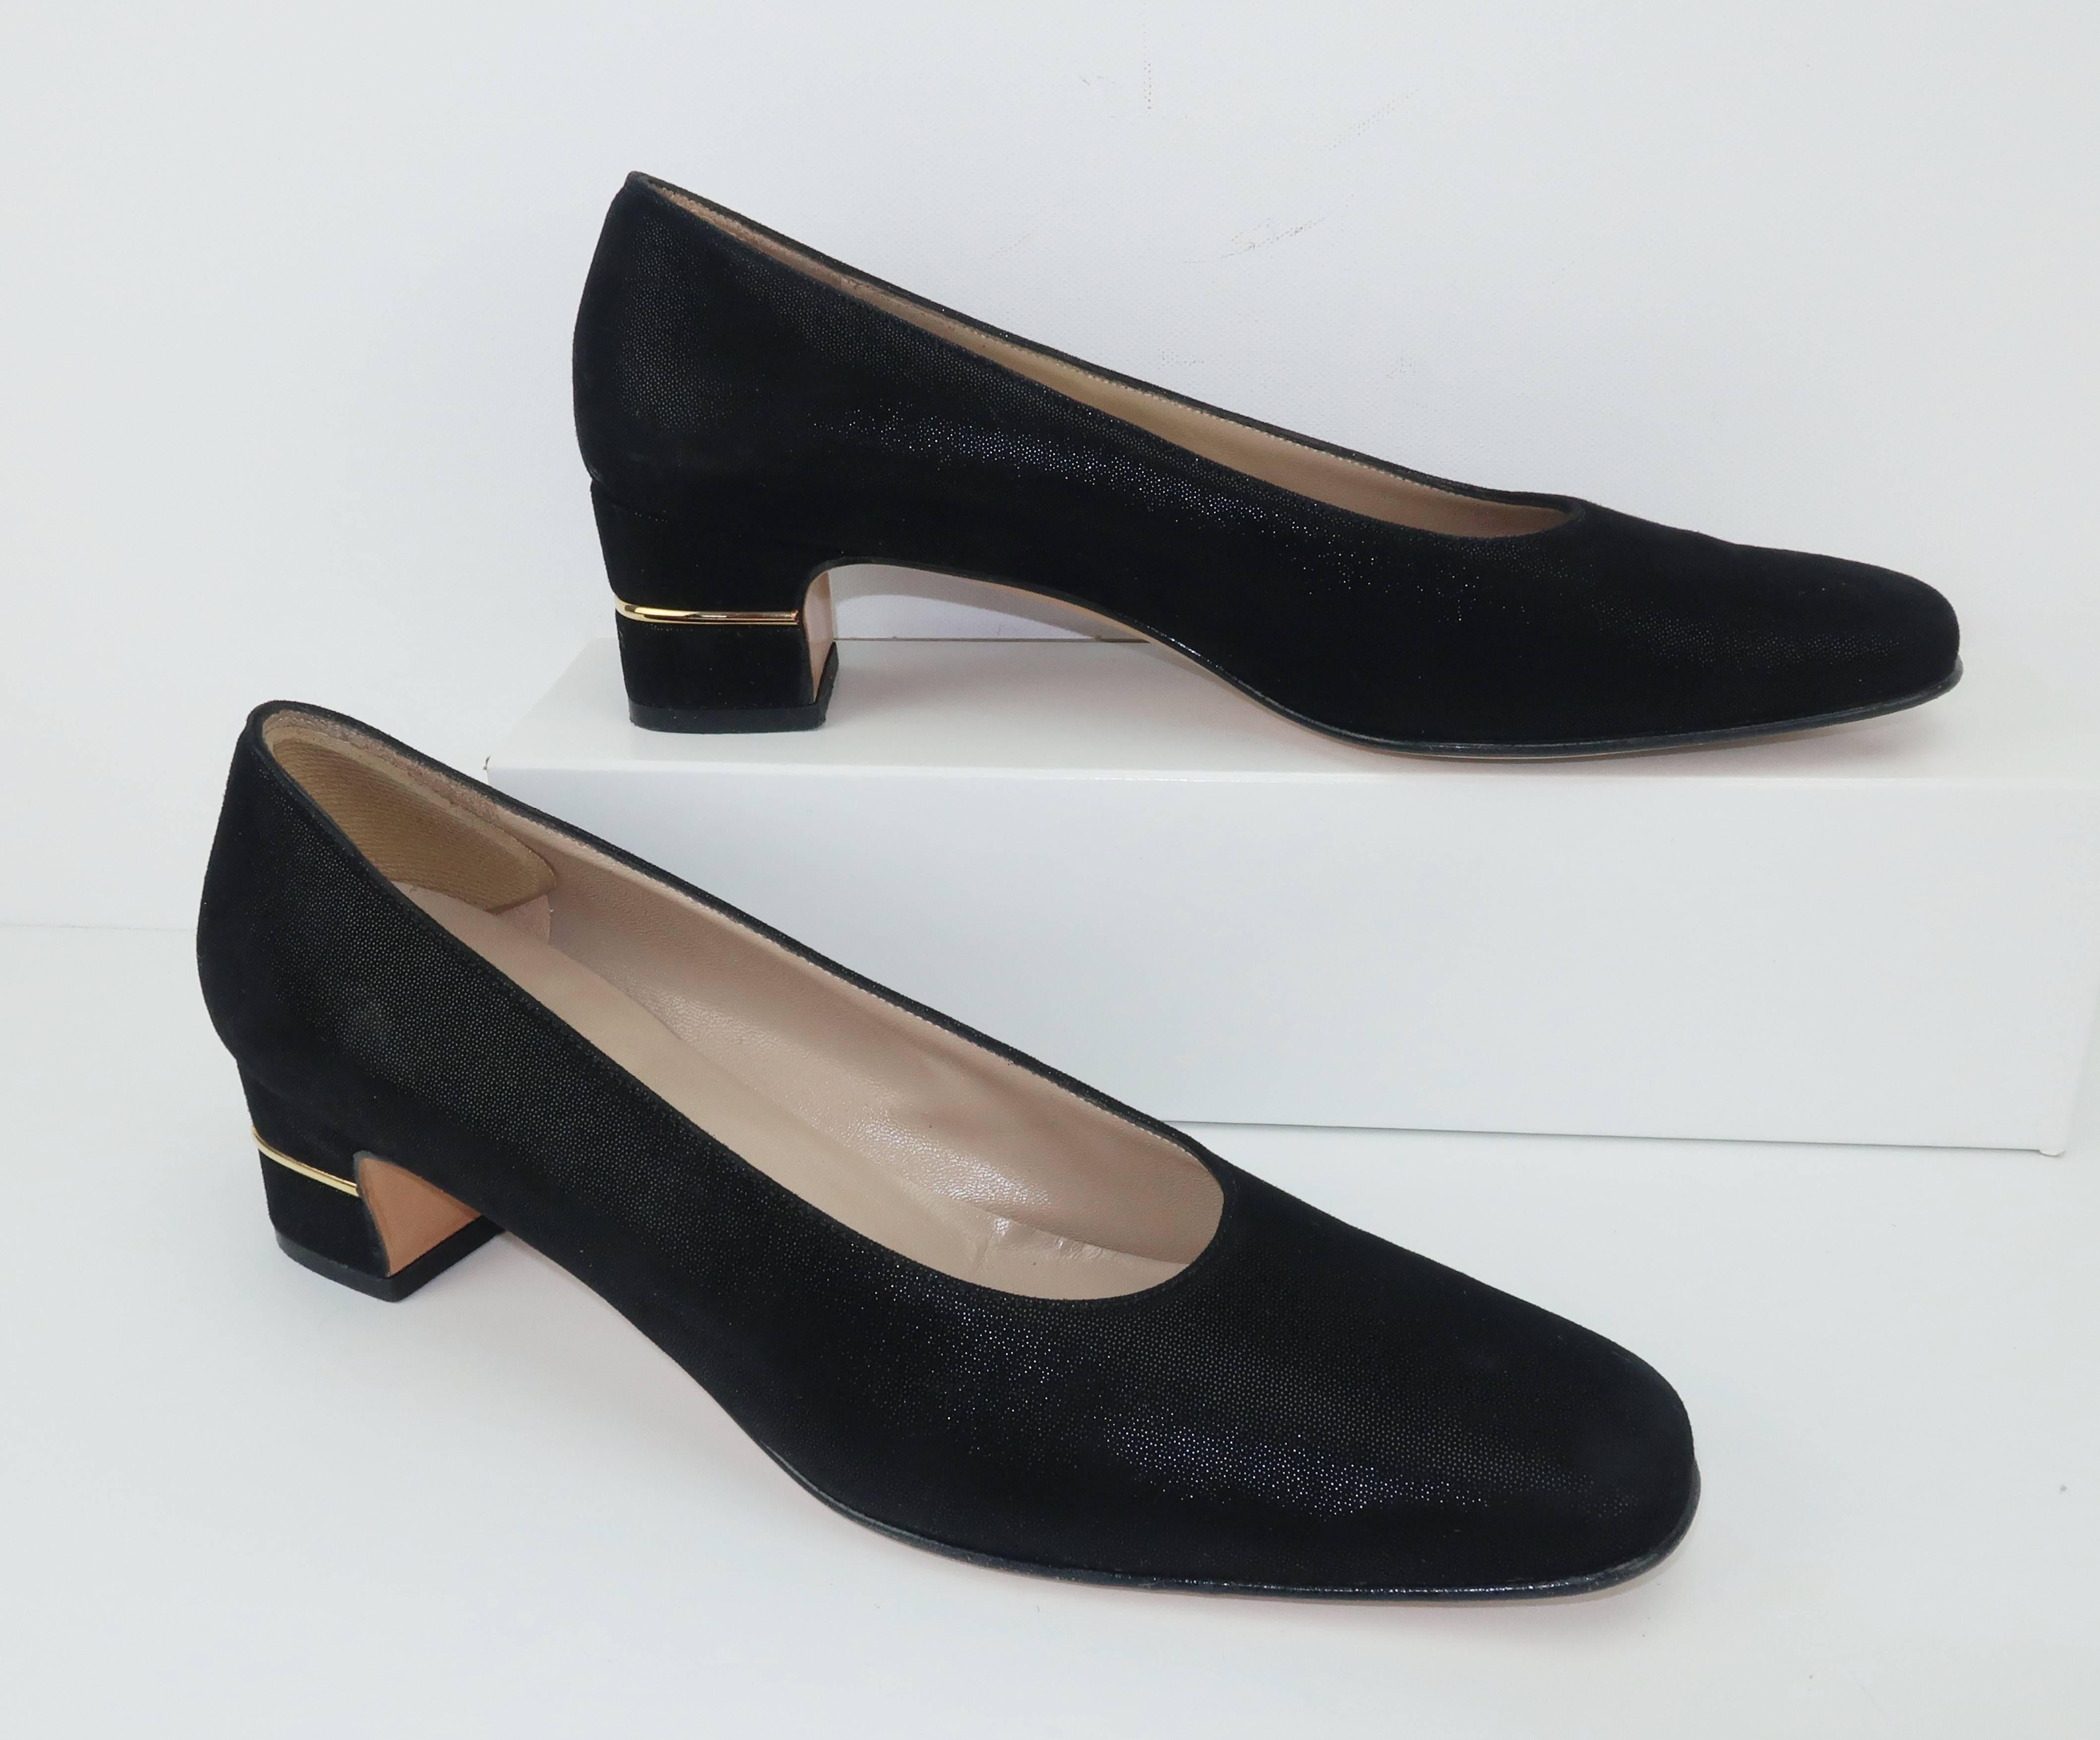 Classic Ferragamo sensibility with stylish details makes these black suede shoes a functional option for everything from day wear to evening attire.  The body of the shoe is formed with a laminated suede which gives the subtle effect of a shimmer or